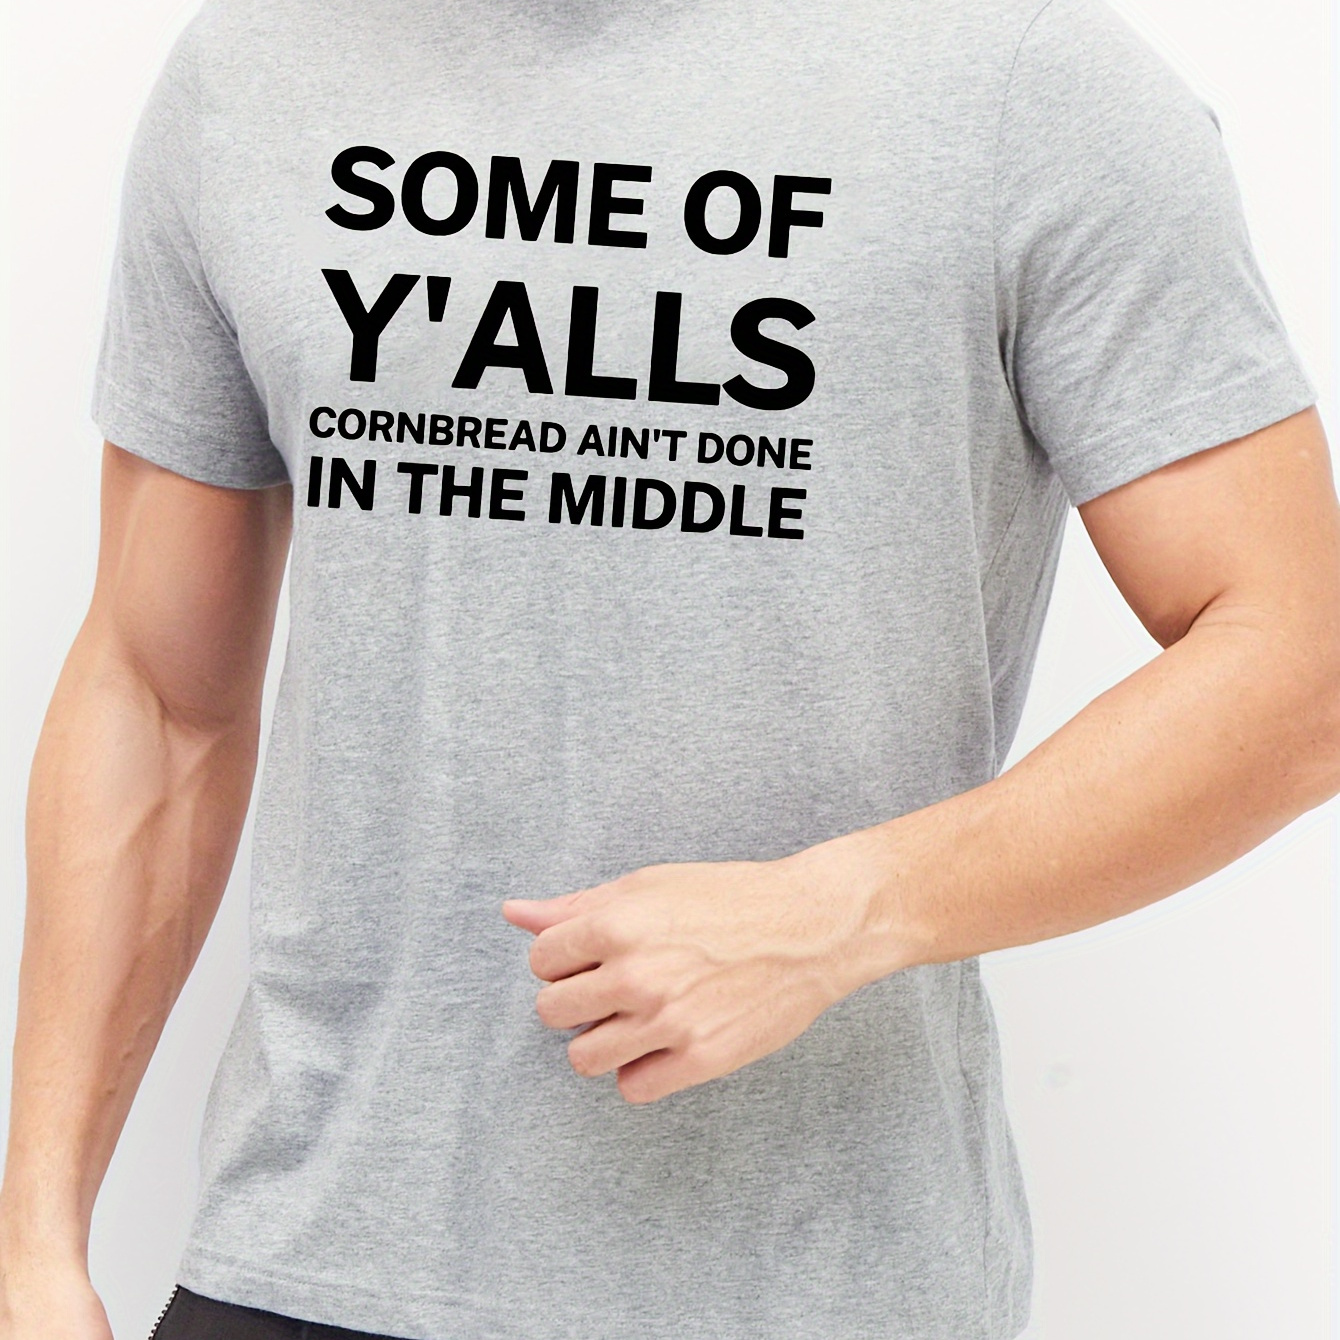 

Some Of Y' Corn Bread Ain't Done In The Middle Sentence Print T-shirt, Men's Breathable Comfy Cotton Top, Casual Crew Neck Short Sleeve T-shirt For Summer